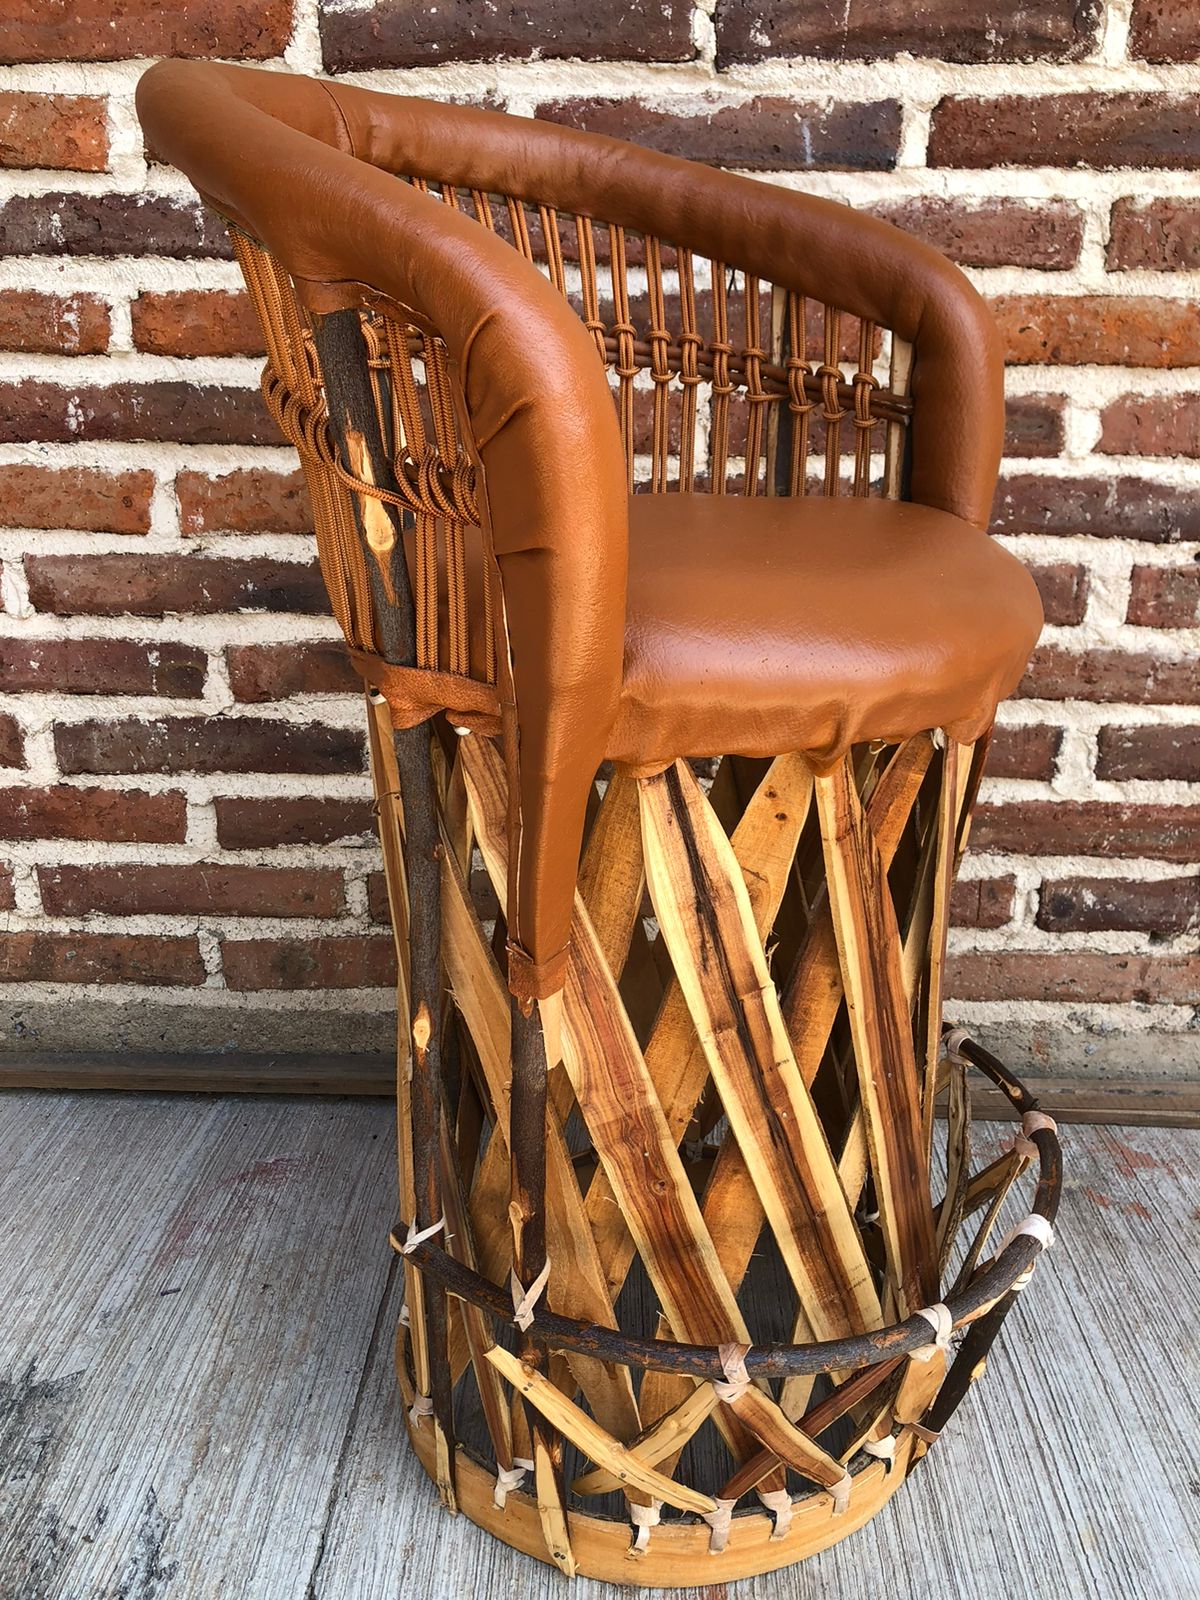 Mexican Handmade Cushioned Equipal Acapulco Barstool Chair-  Traditional MeXican Artisan Fashion & Design